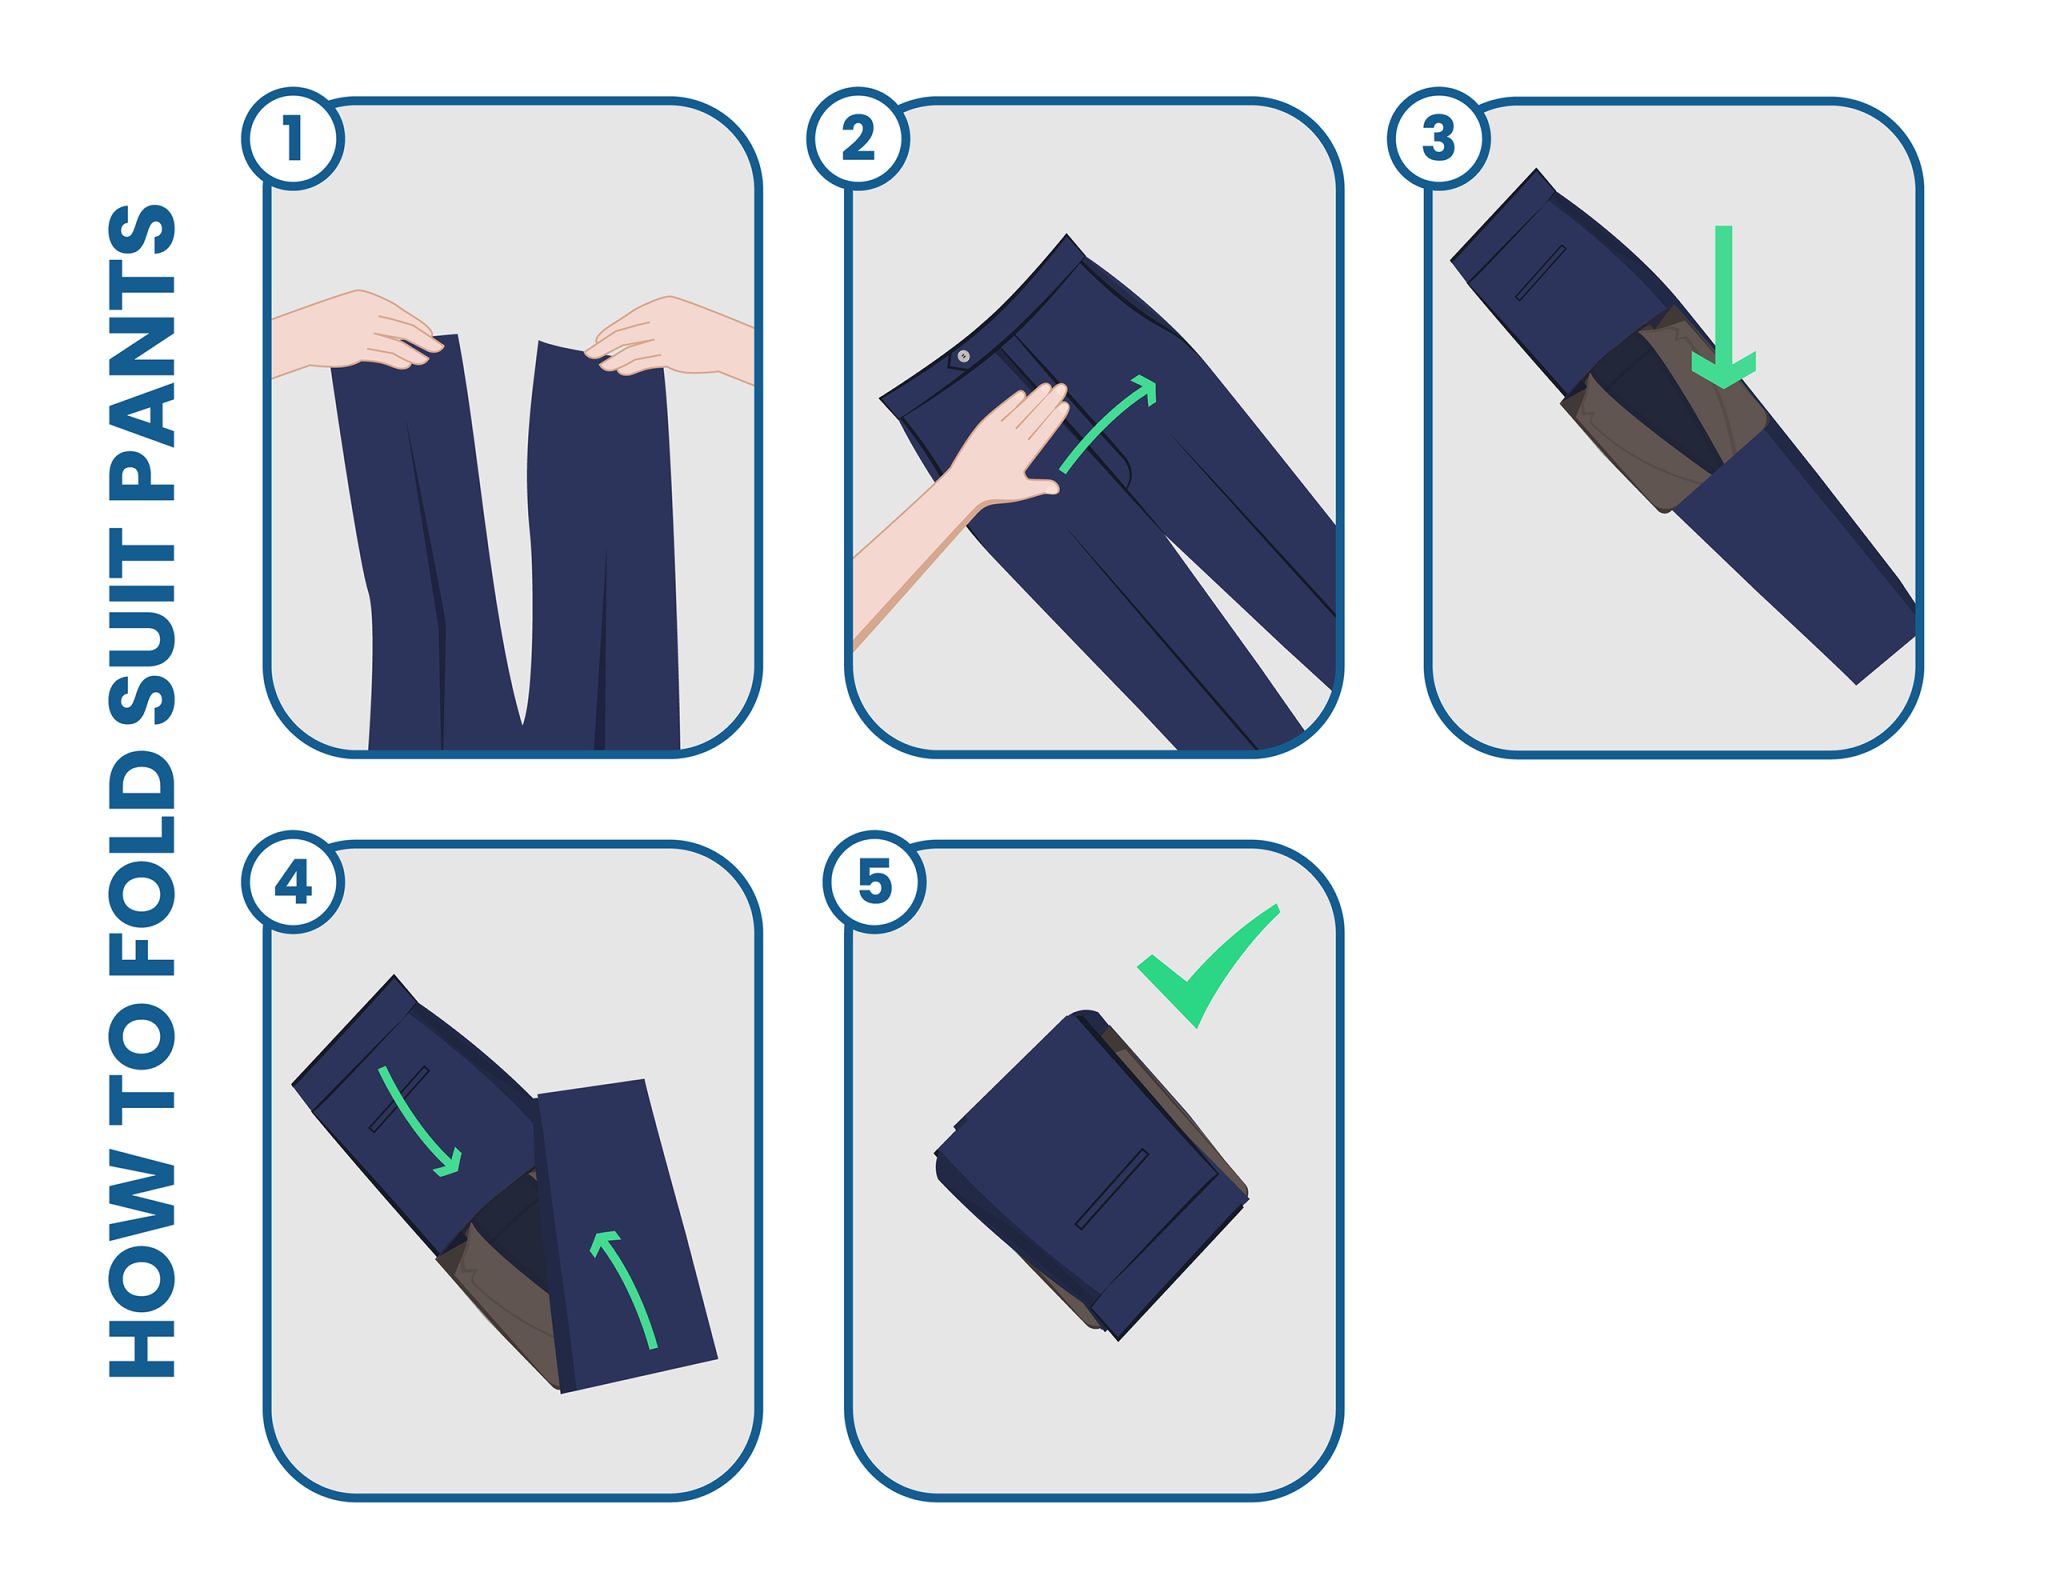 How to Fold a Suit for Travel in a Suitcase: 4 Easy Ways!